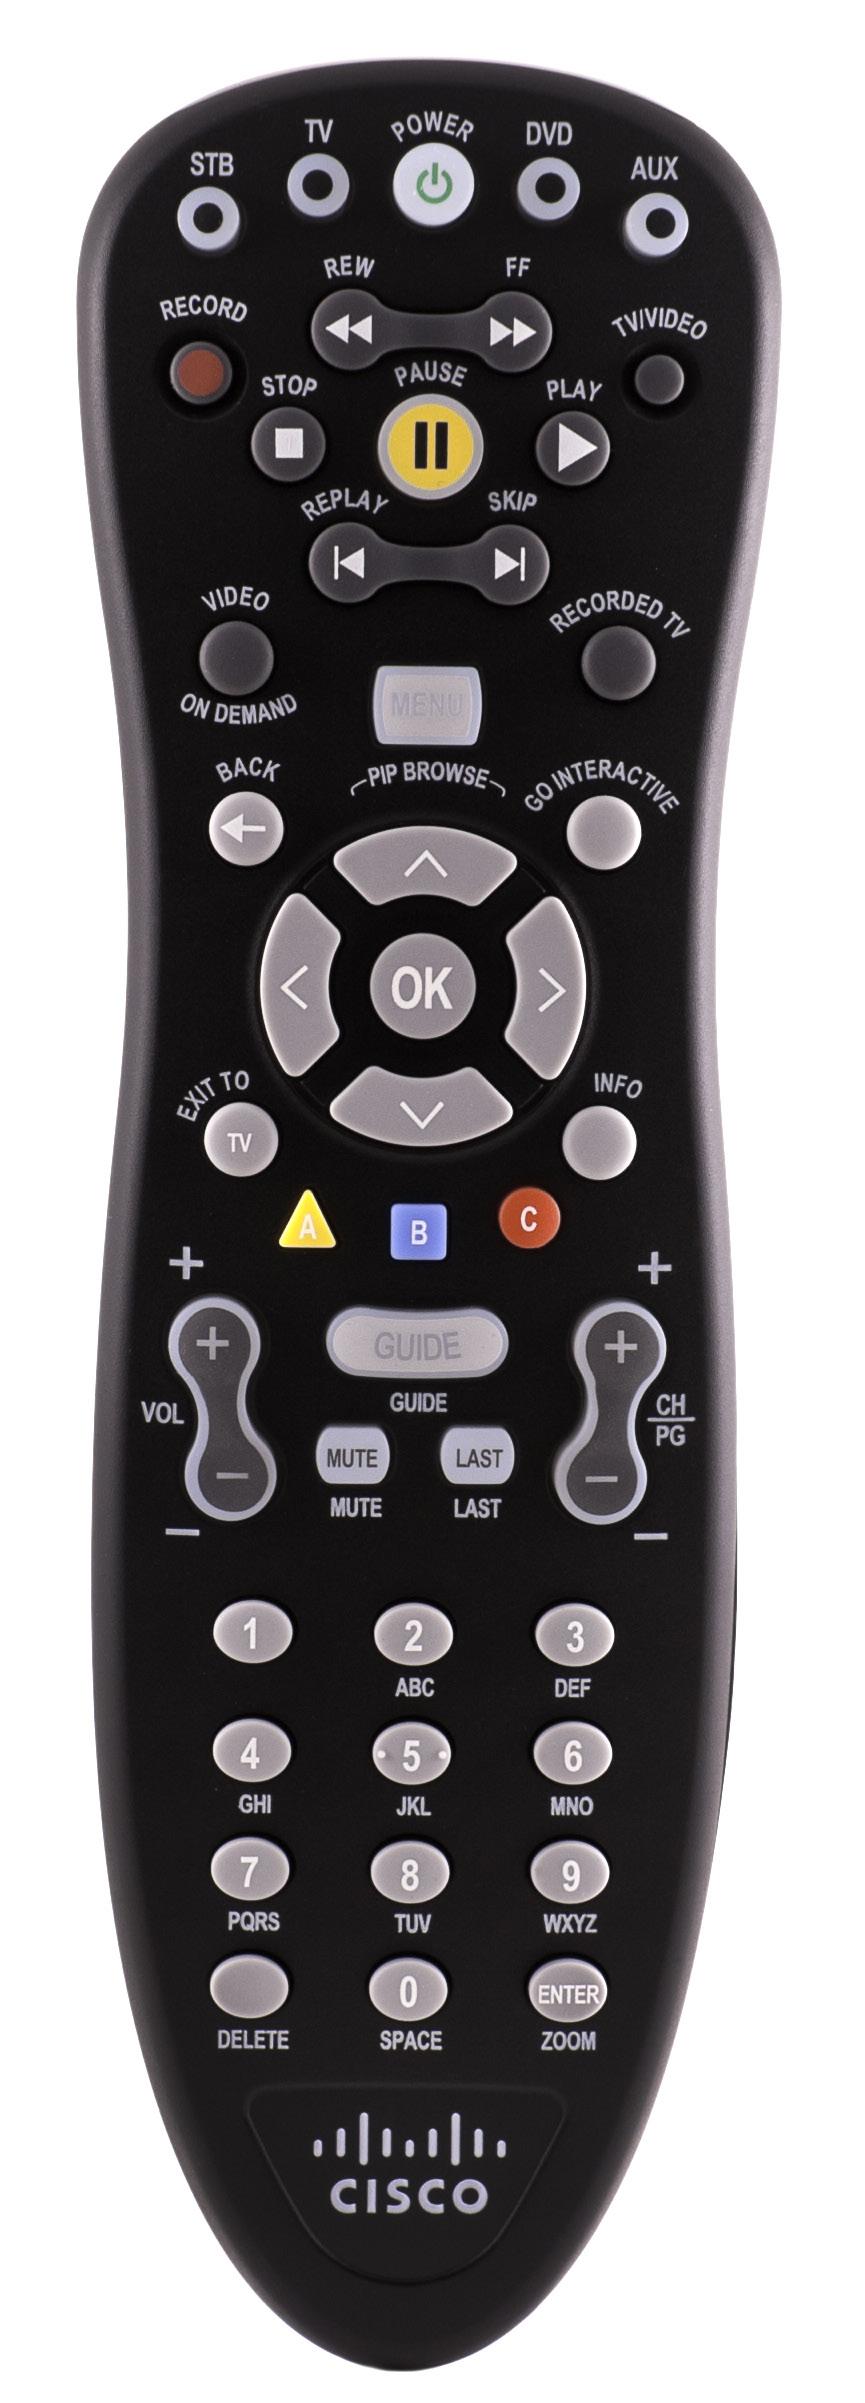 REMOTE CONTROLS Note: Unless otherwise specified, in this document the term remote control (or remote) refers to the Universal Remote Control provided with TDS TV, not your TV remote control or any